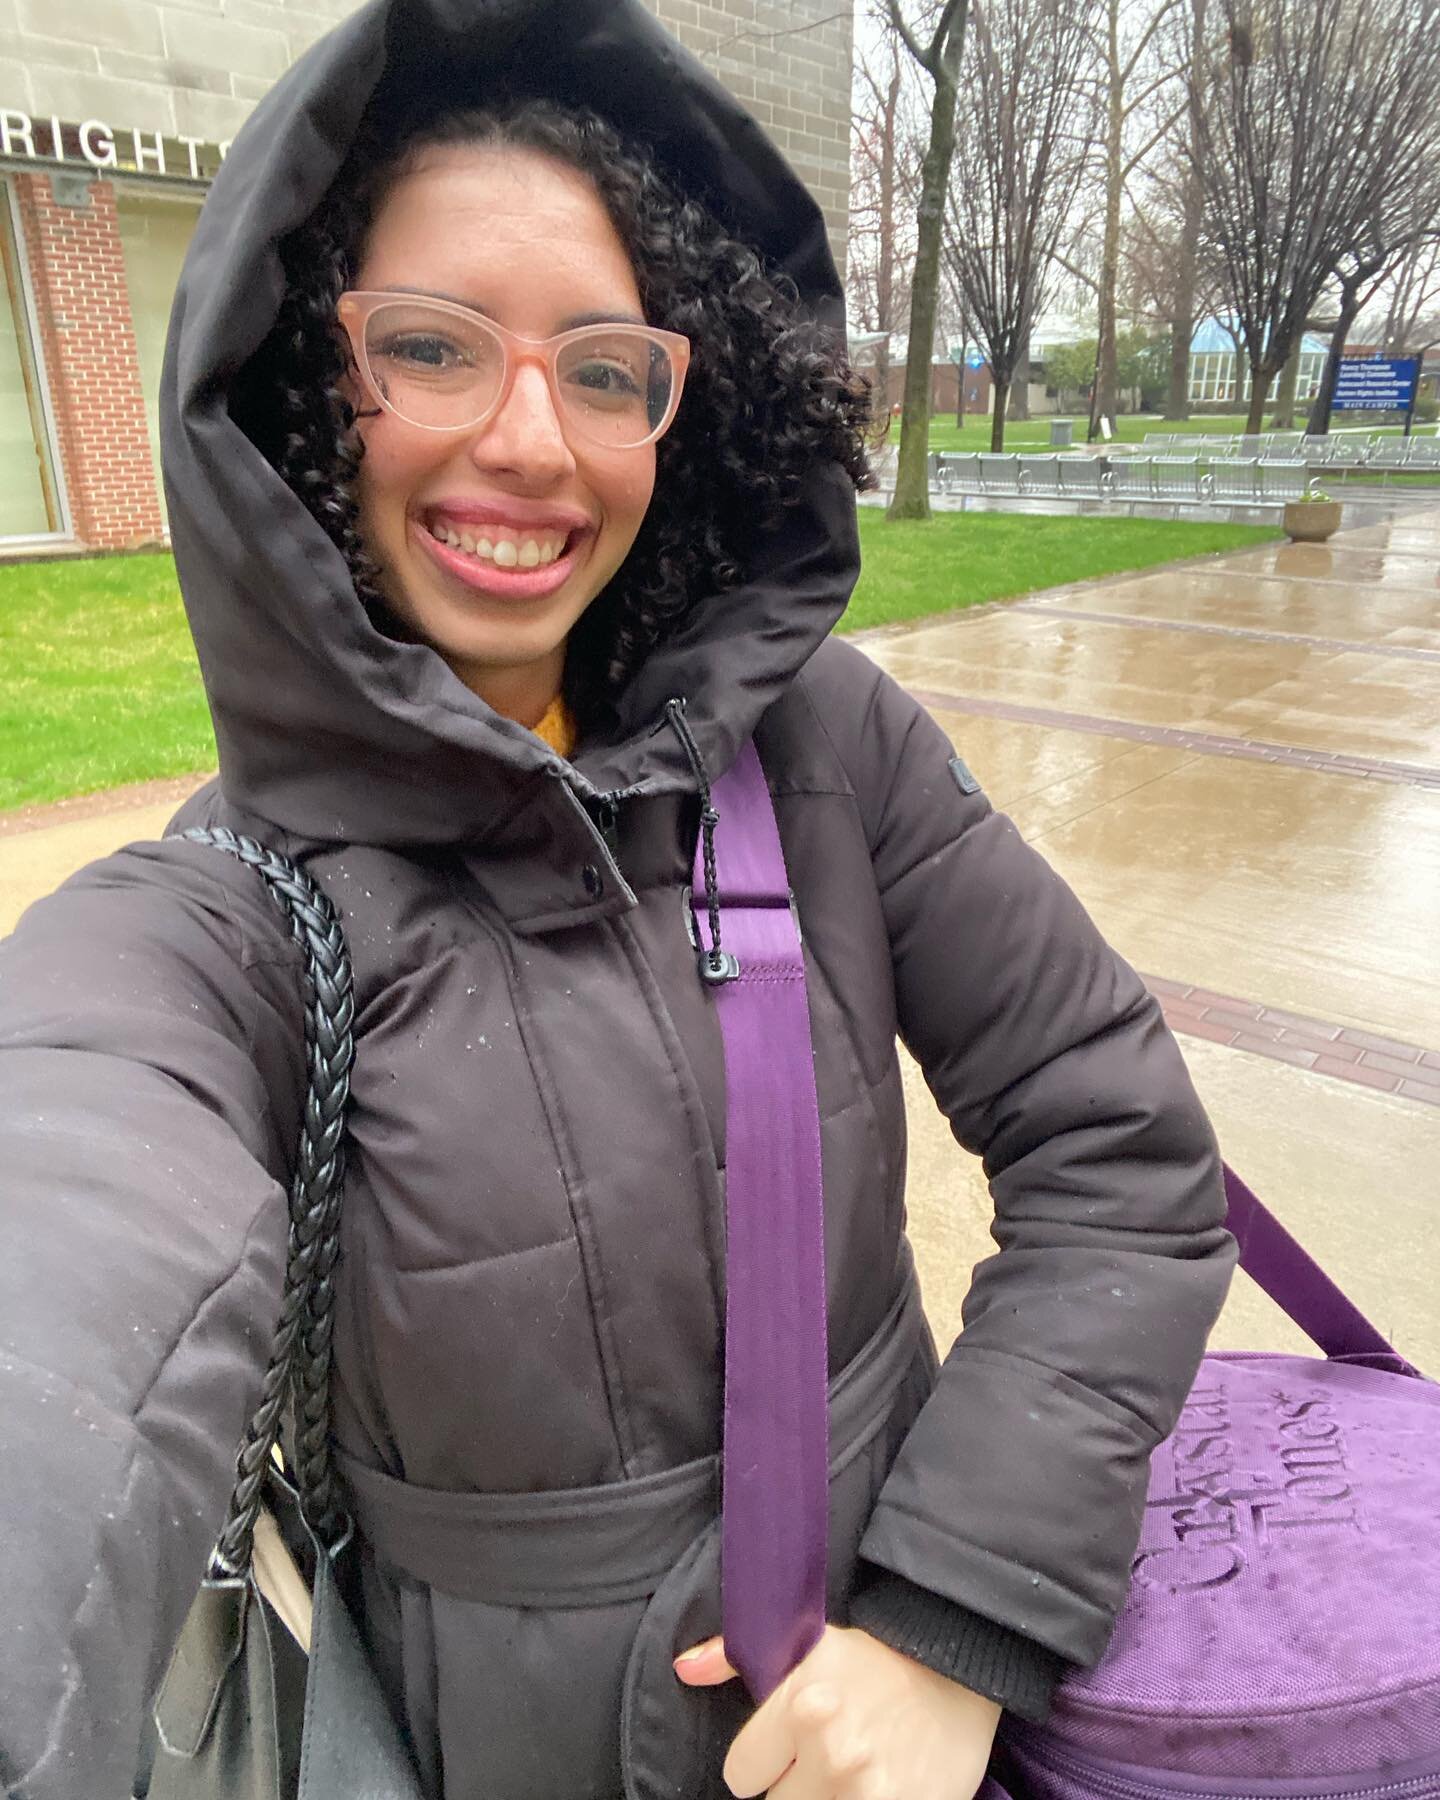 Braved the storm today for a bowl session @keanuniversity ☔️ and it was the perfect reminder of why I do what I do 🥣

When I did my first yoga and meditation trainings, I was doing them for me. 👩🏻&zwj;🦱

I was desperate to sleep better, feel bett